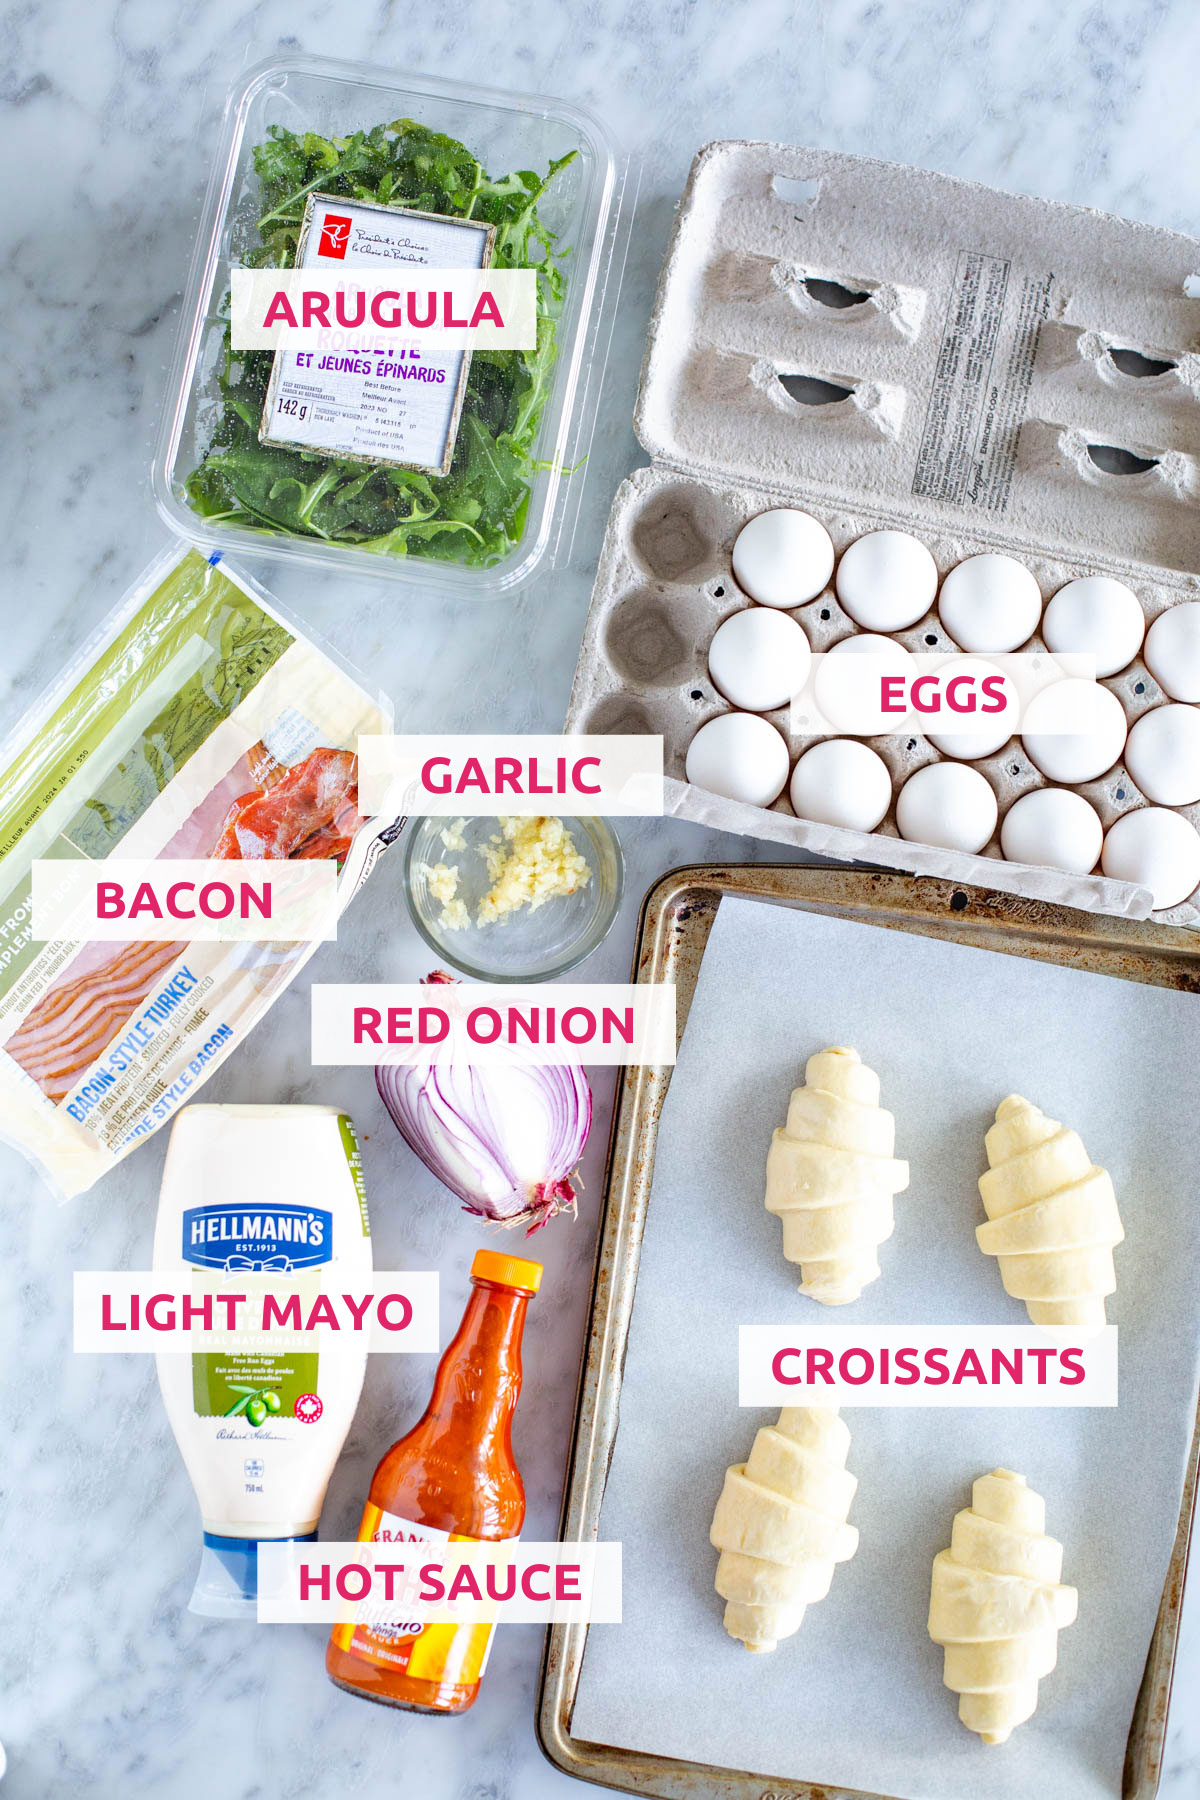 Ingredients for croissant breakfast sandwiches: croissants, eggs, arugula, bacon, garlic, hot sauce, light mayo and red onion.